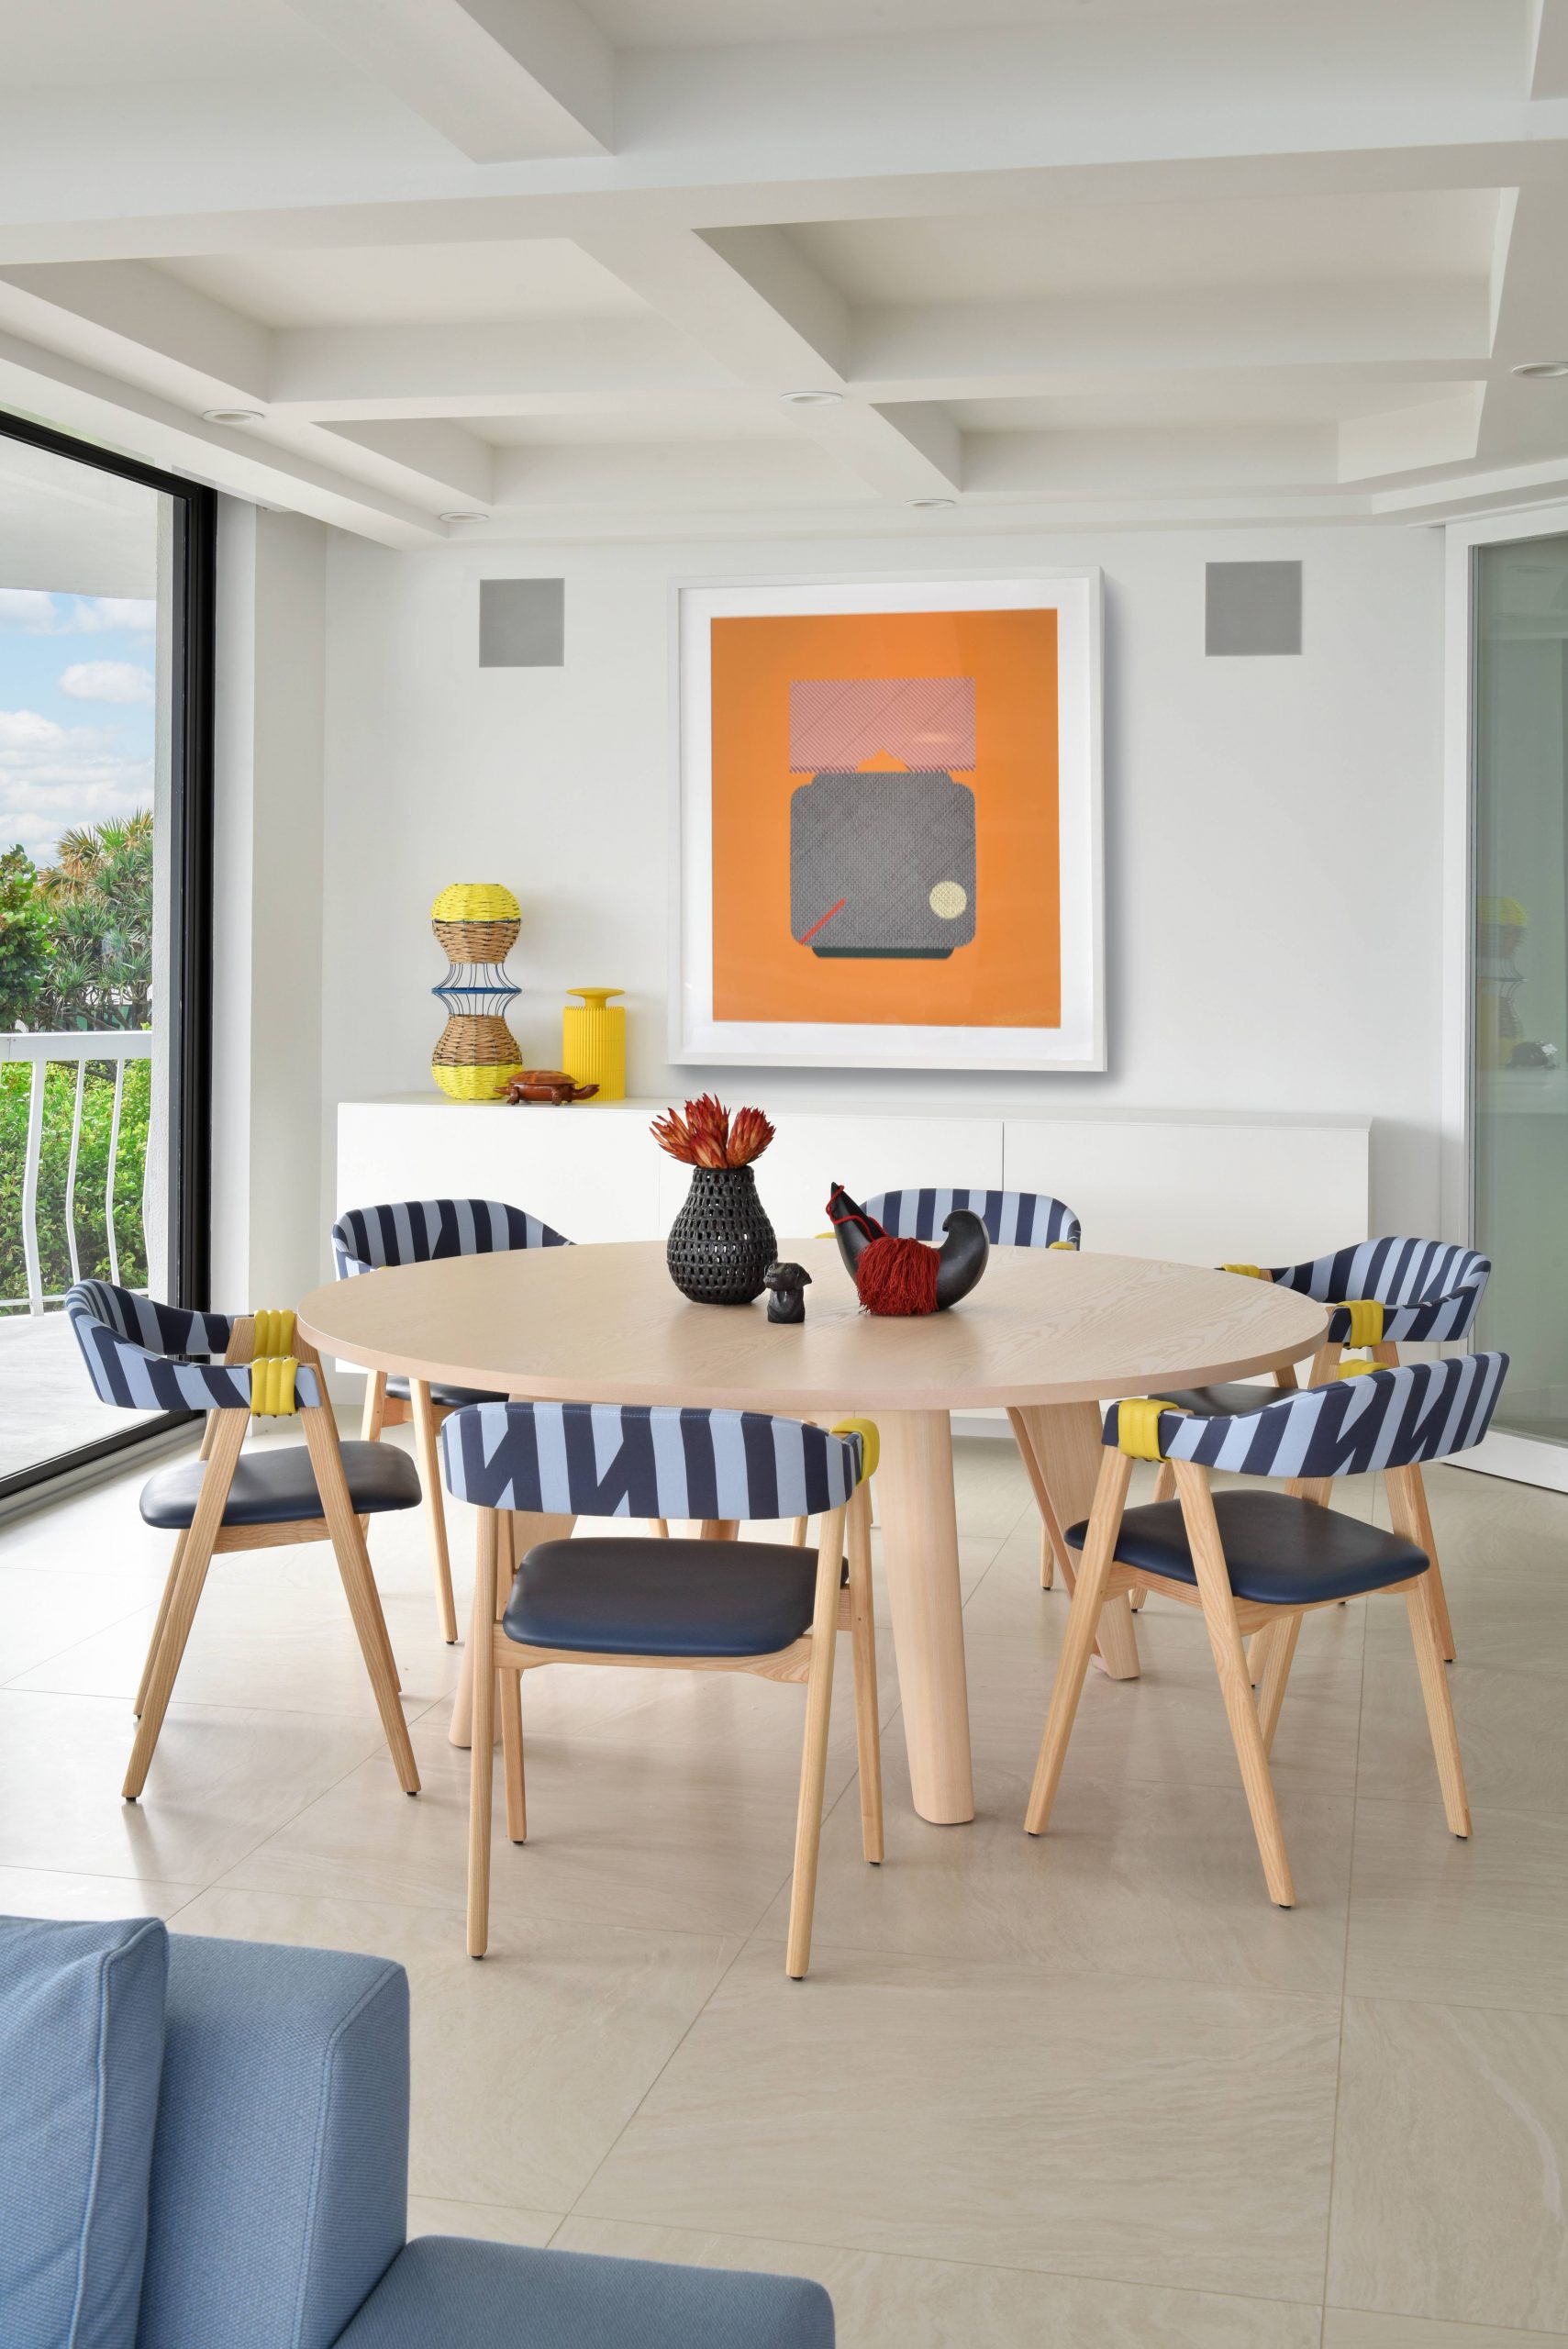 Colorful contemporary dining room design with irreverent artwork on the wall - Ghislaine Viñas The Radicalist Design World  home inspiration ideas